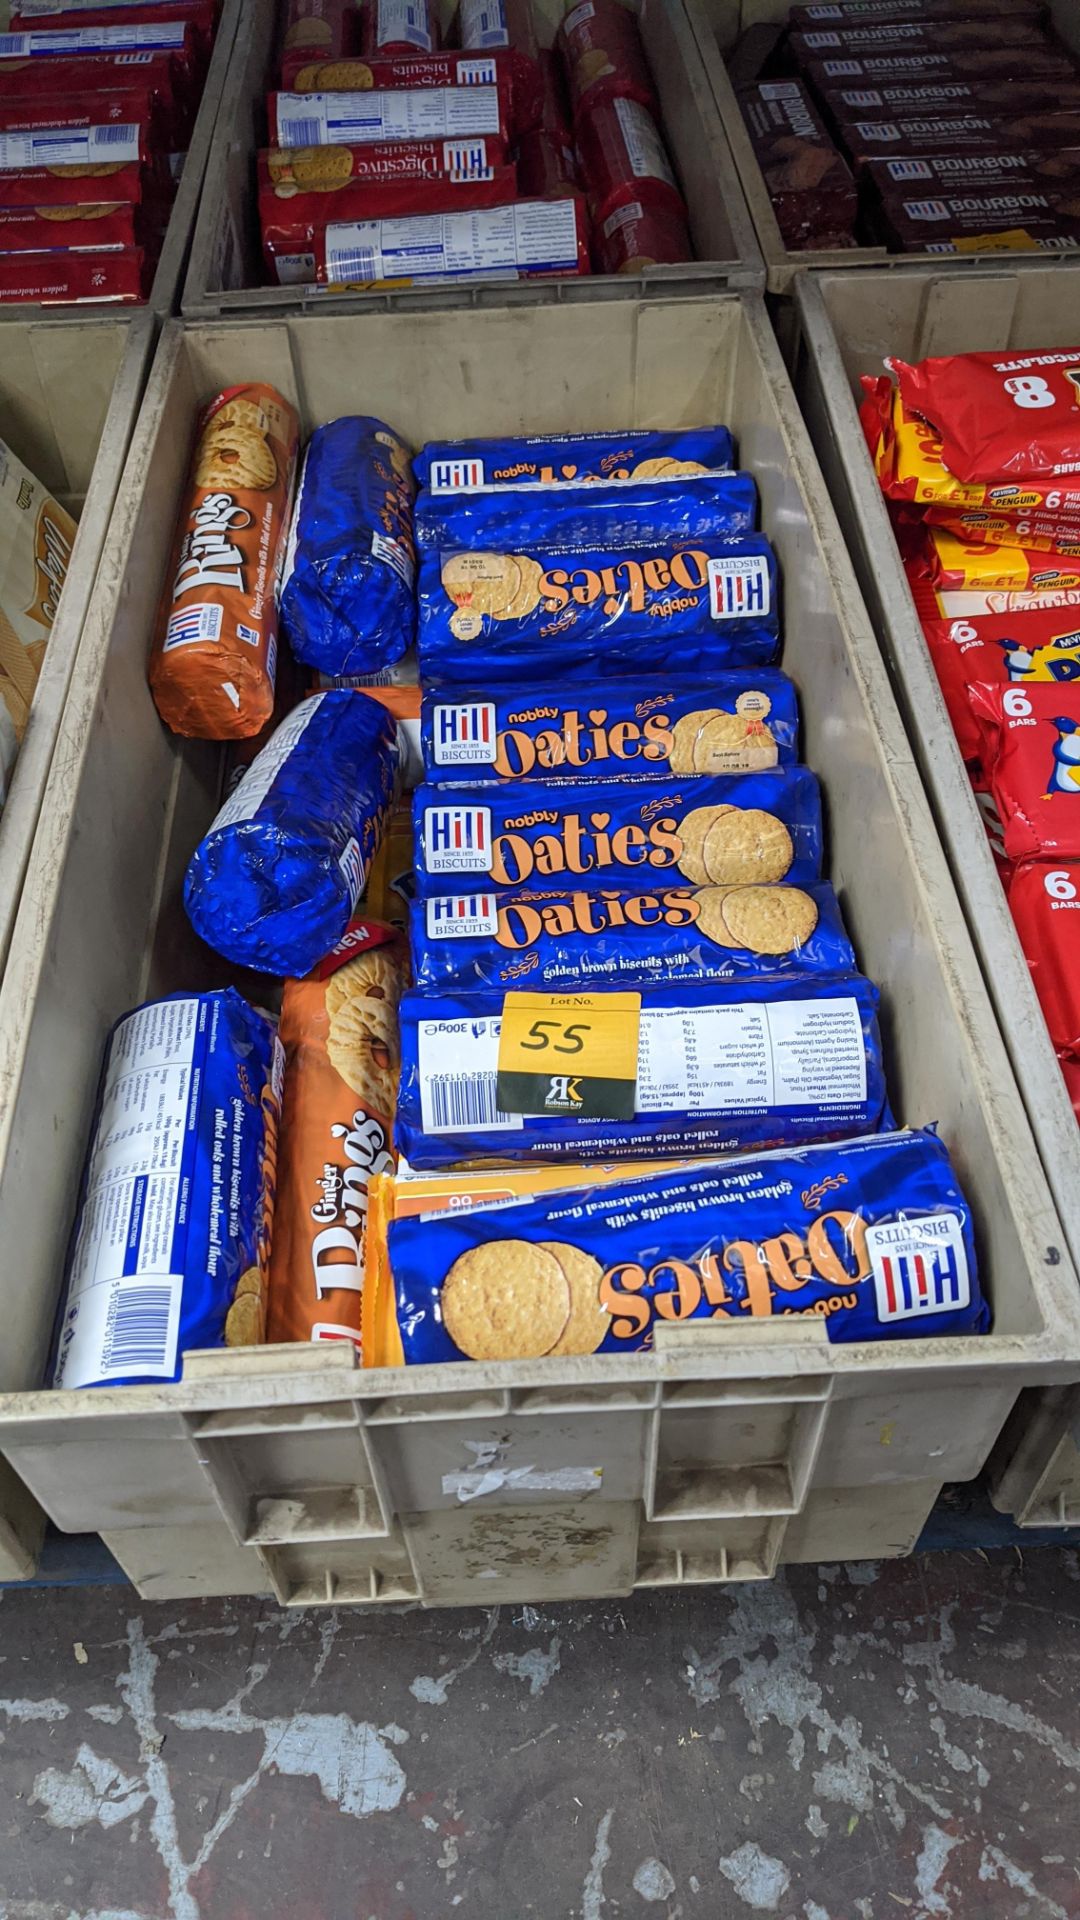 Contents of a crate of Oaties, Breakway, Ginger Rings & other biscuits - crate excluded. IMPORTANT –